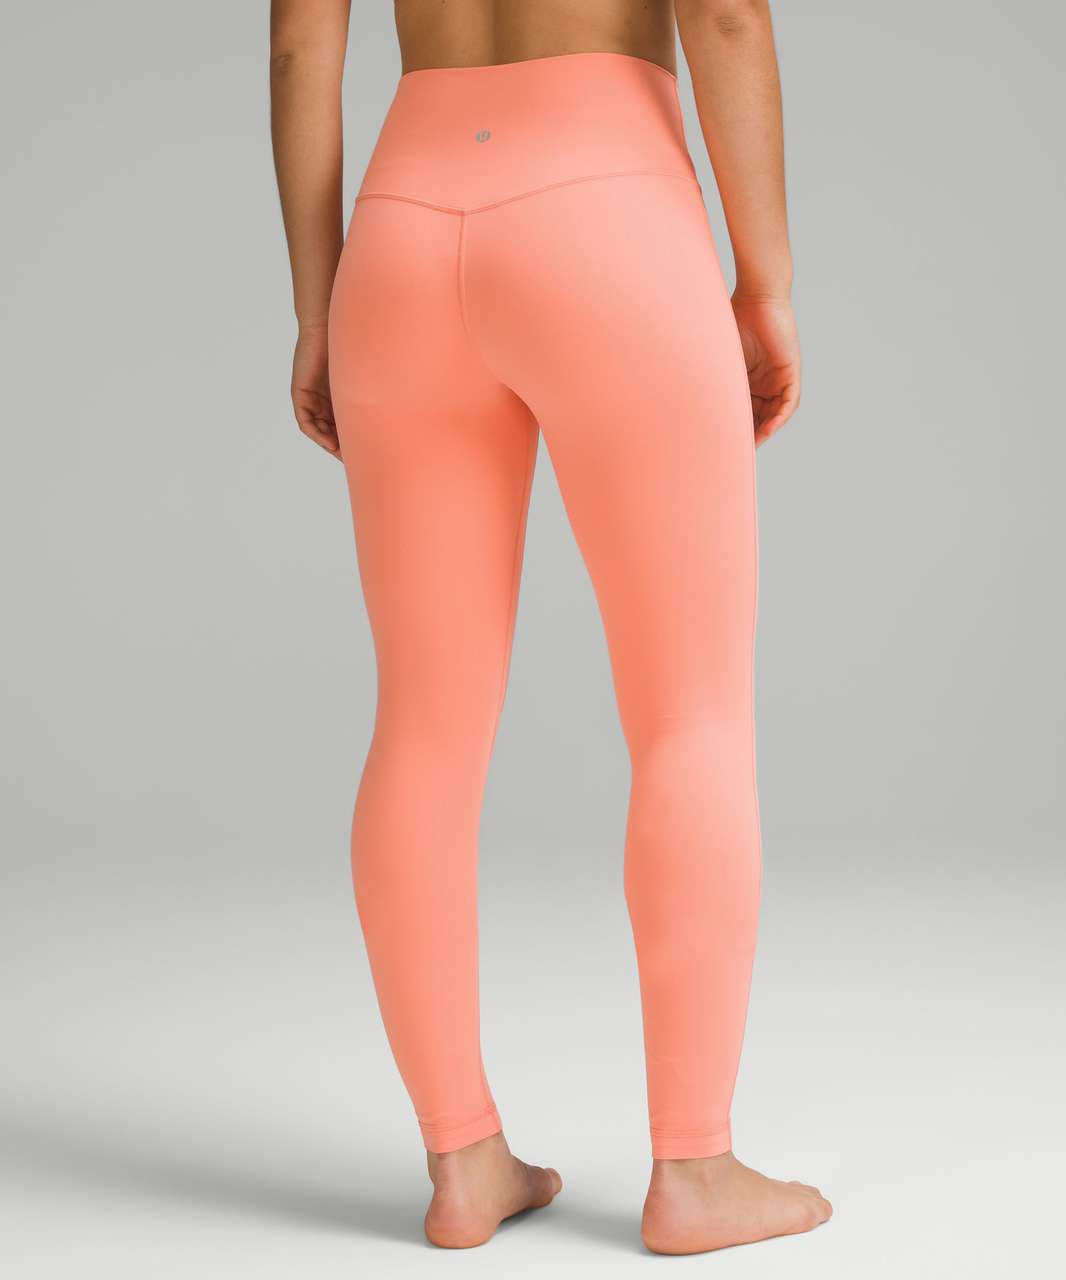 Lululemon Align High-Rise Pant 28" - Sunny Coral